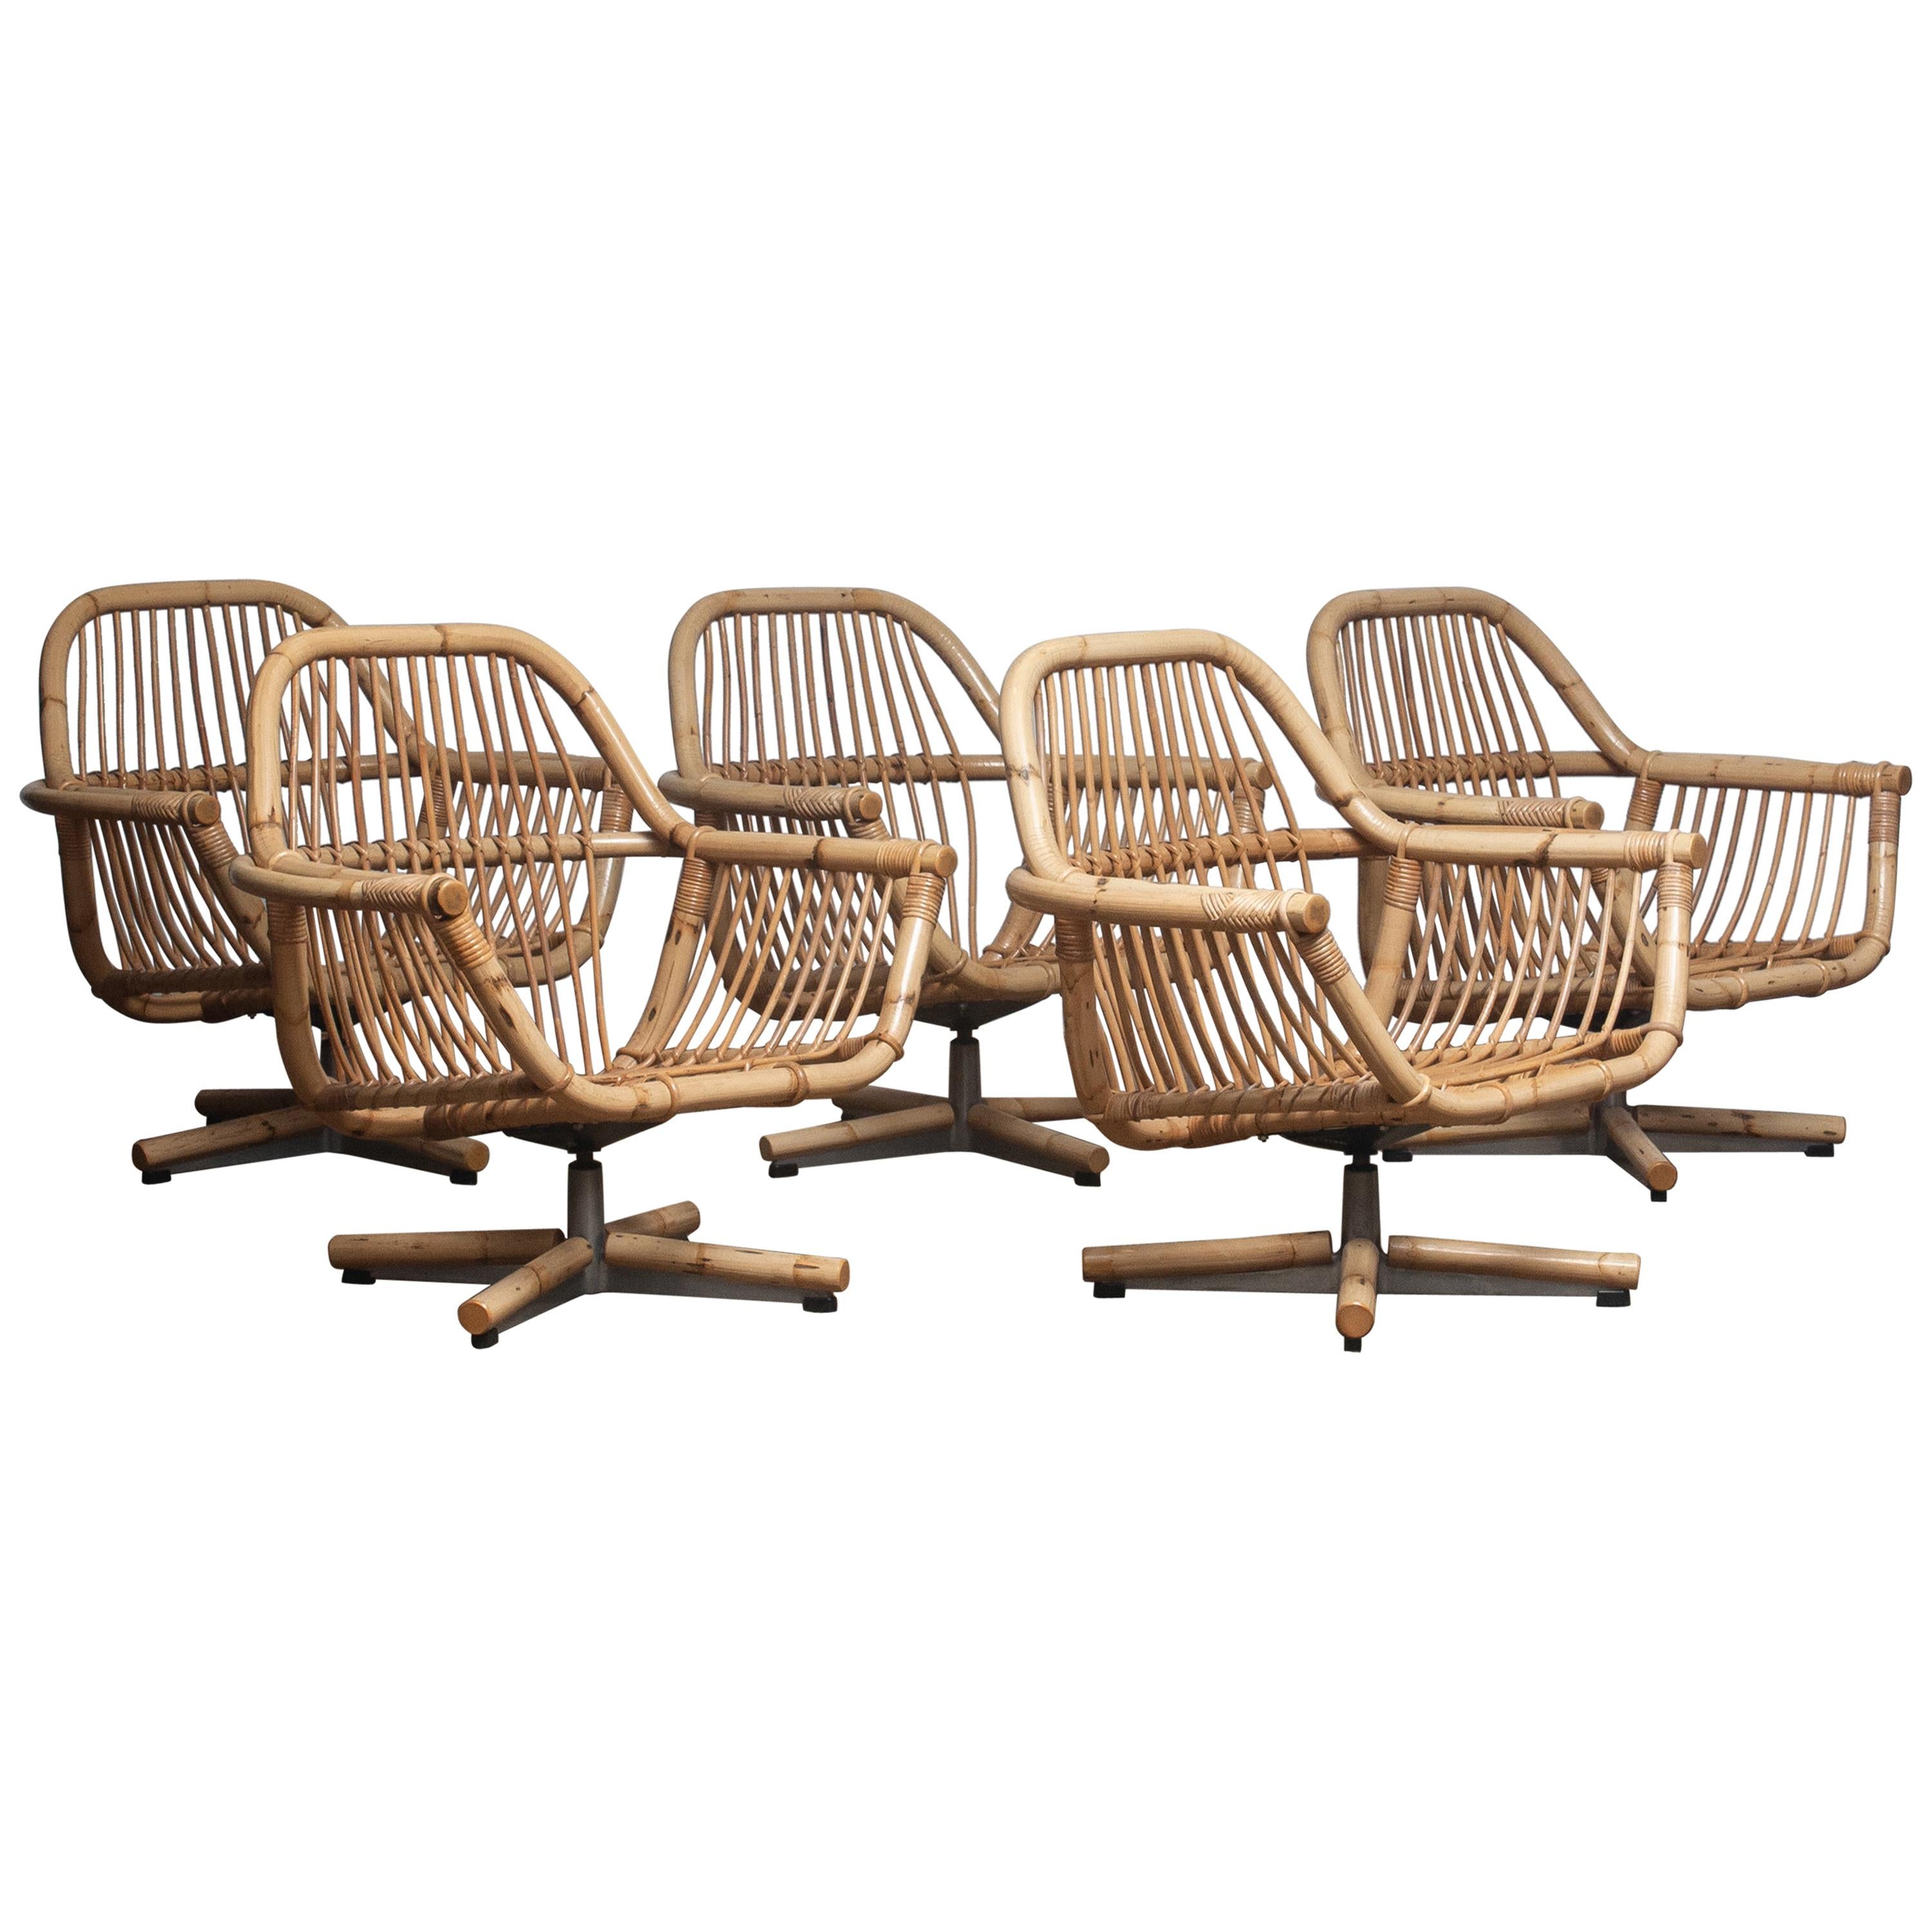 Extremely beautiful and rare Scandinavian garden set or lounge set consisting five rattan swivel chairs (on an aluminum stand) and one coffee table all in original and good condition.
Made in Sweden in the 1960s.
Sizes of the five chairs are for